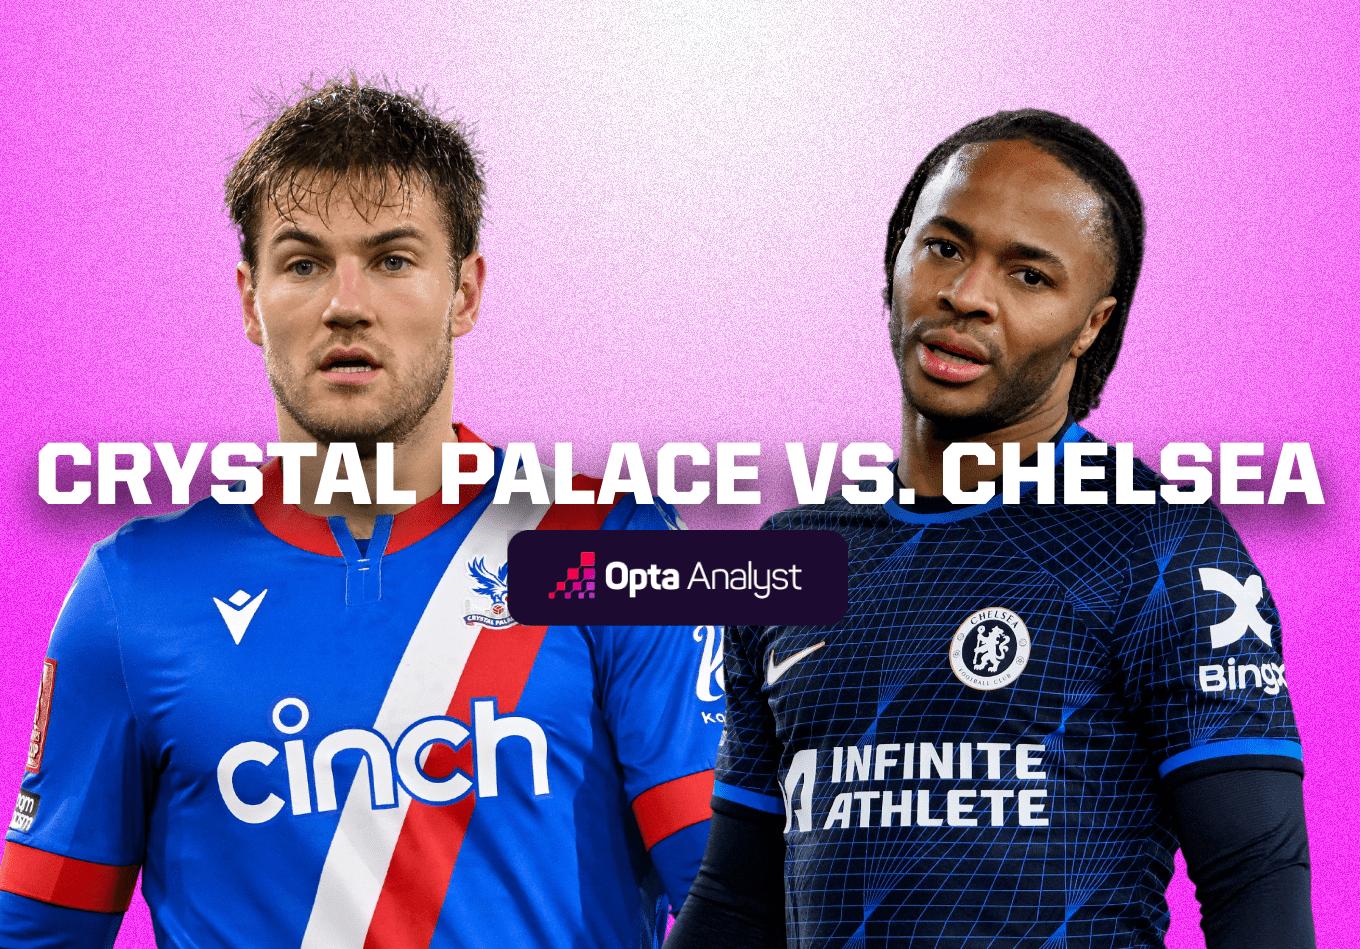 Crystal Palace vs Chelsea: Prediction and Preview